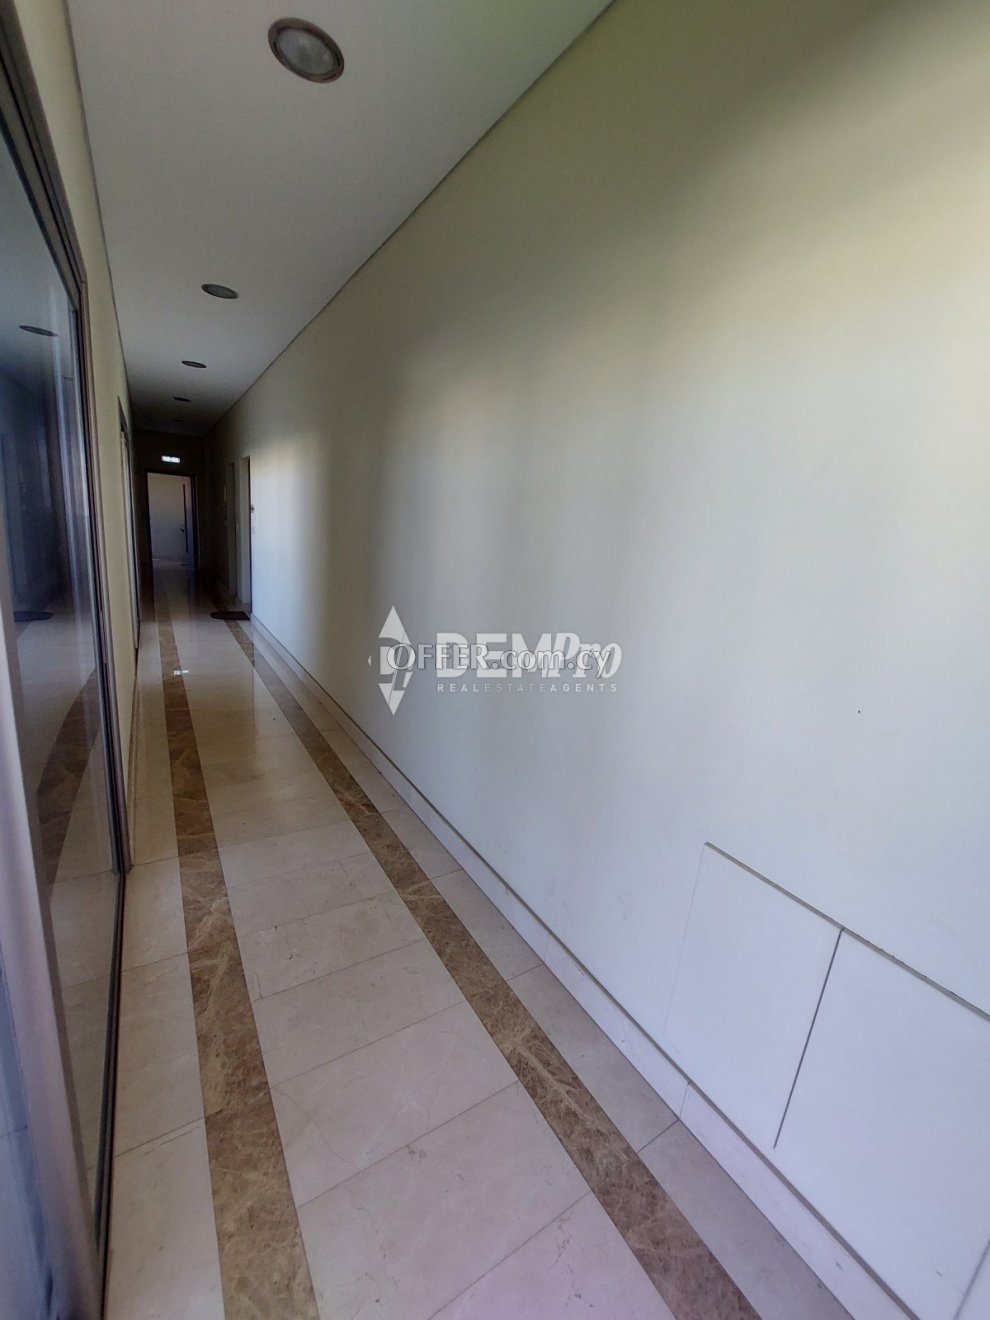 Office  For Rent in Paphos City Center, Paphos - DP2400 - 6